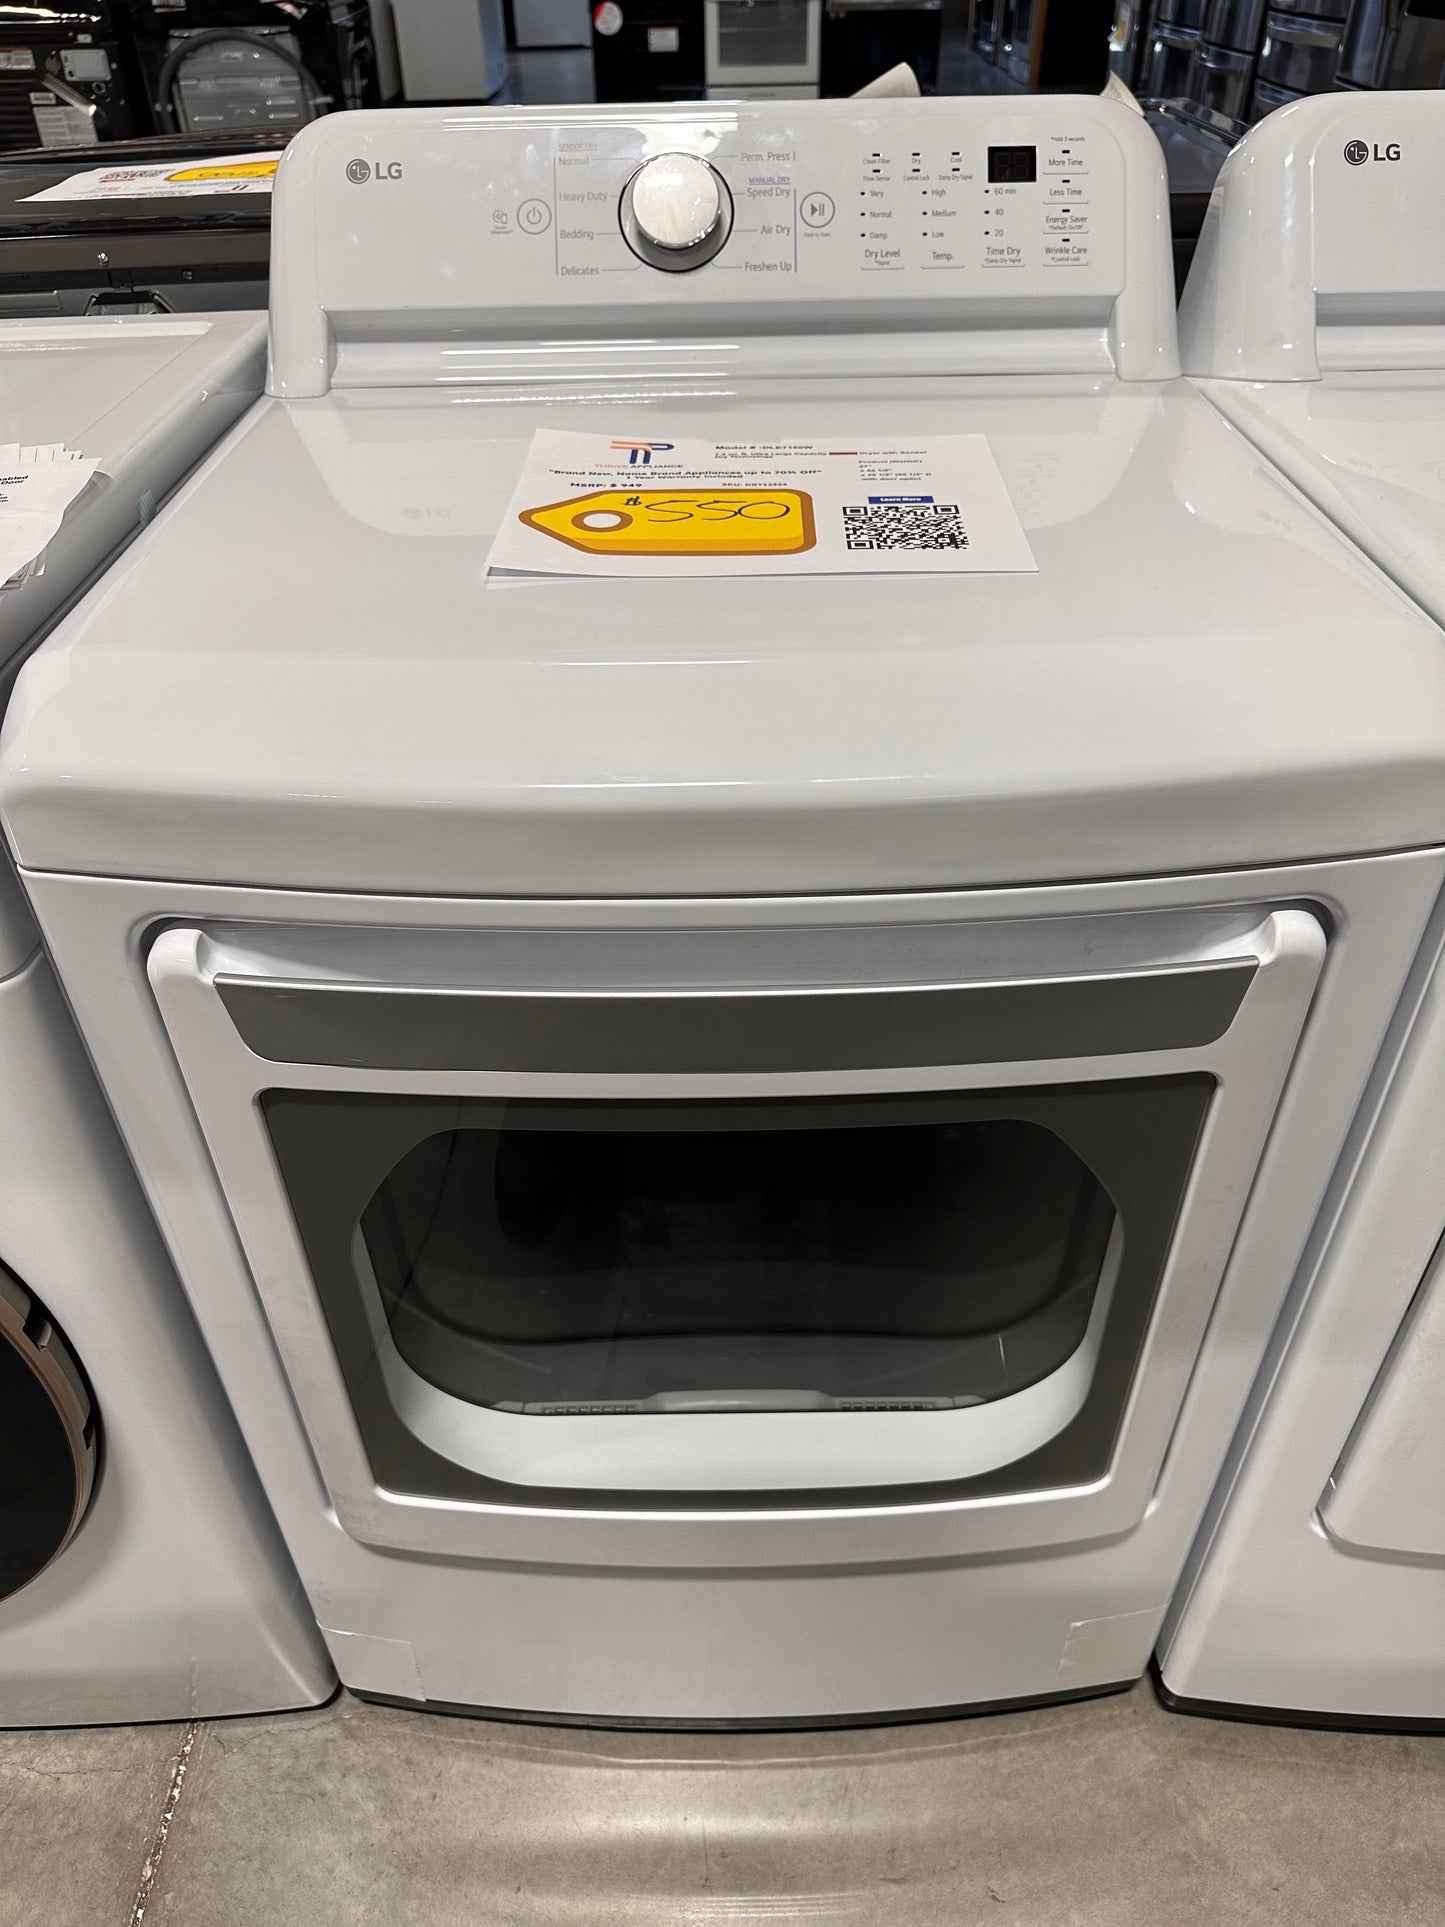 LG - 7.3 Cu. Ft. Smart Electric Dryer with Sensor Dry - White  Model:DLE7150W  DRY12324